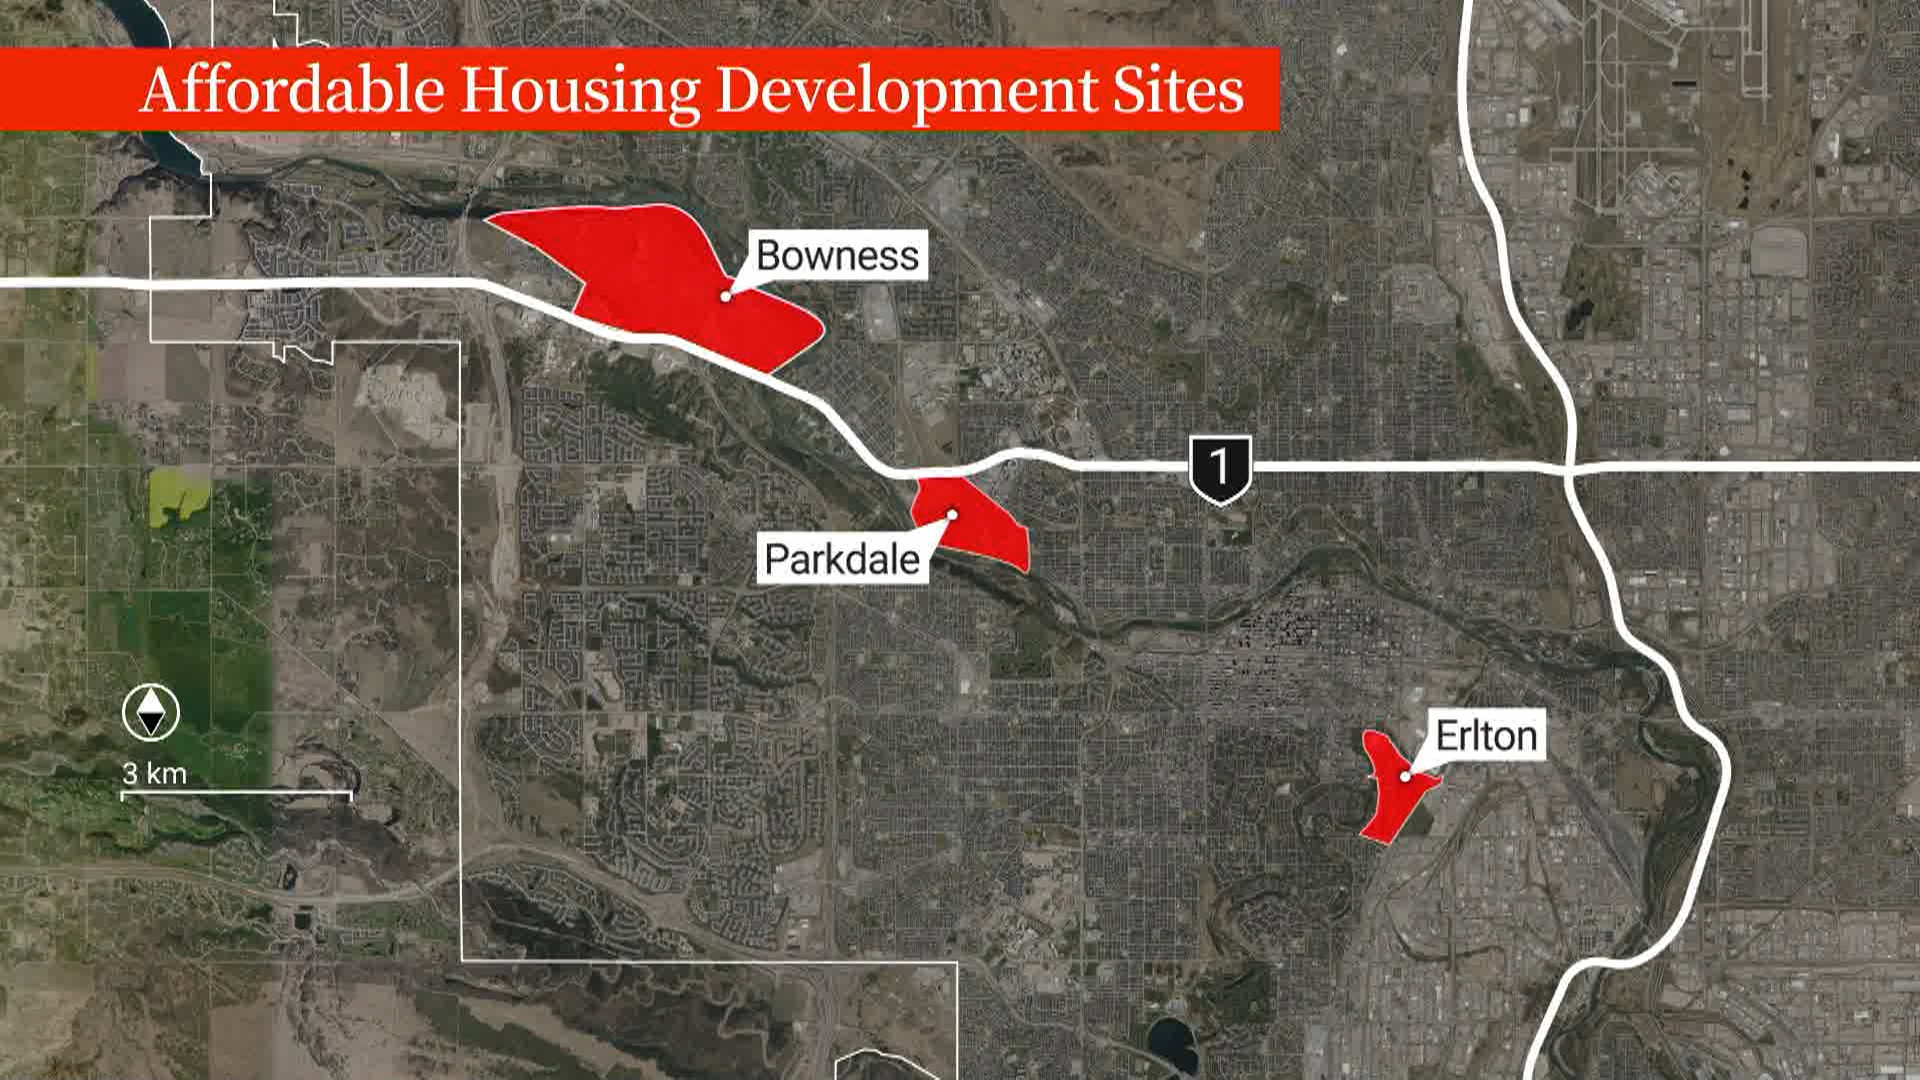 Calgary sells 3 parcels for affordable housing